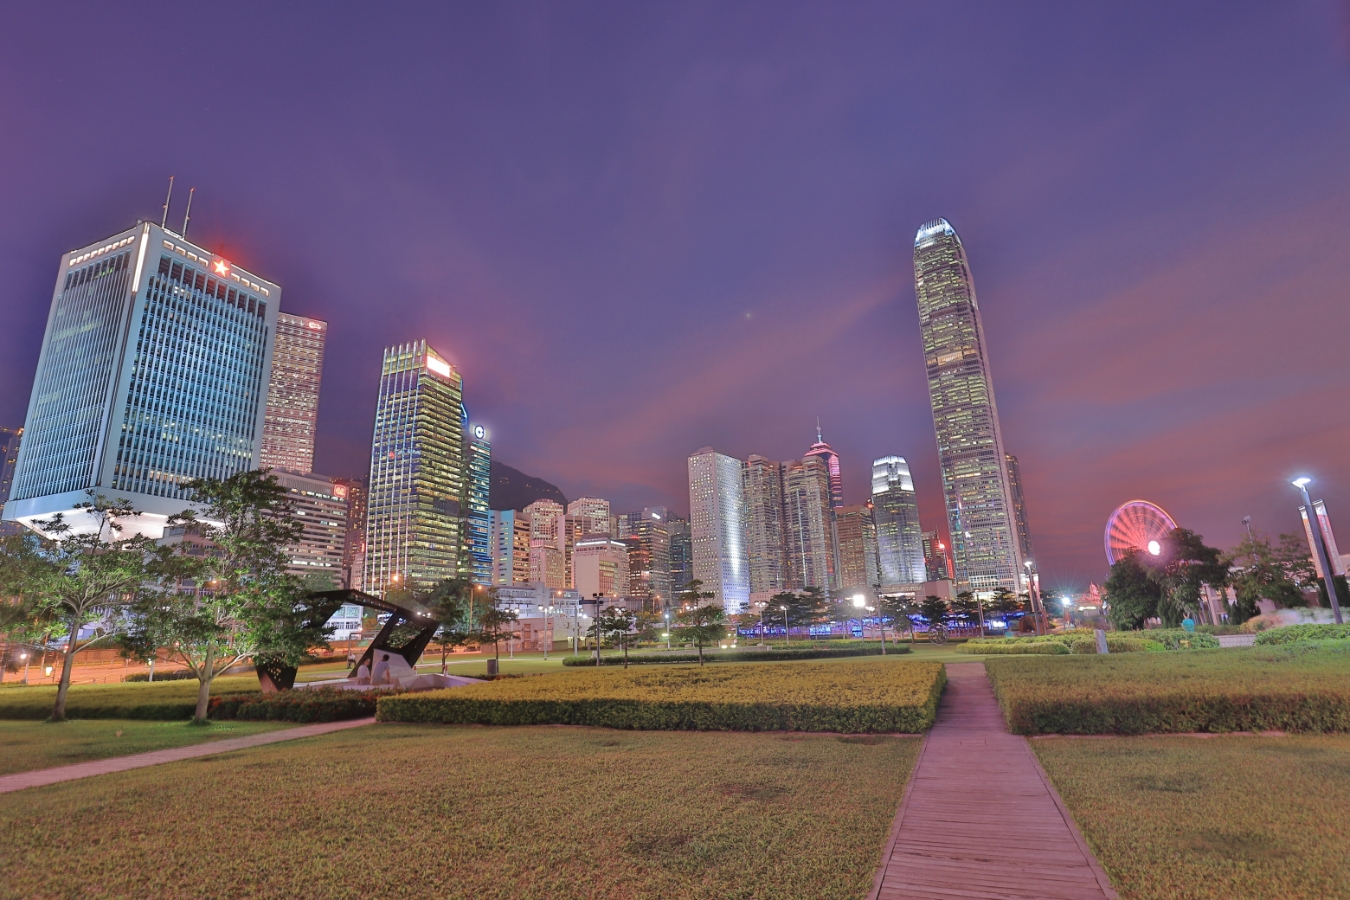 the grassy expanse at tamar park surrounded by government buildings in hong kong